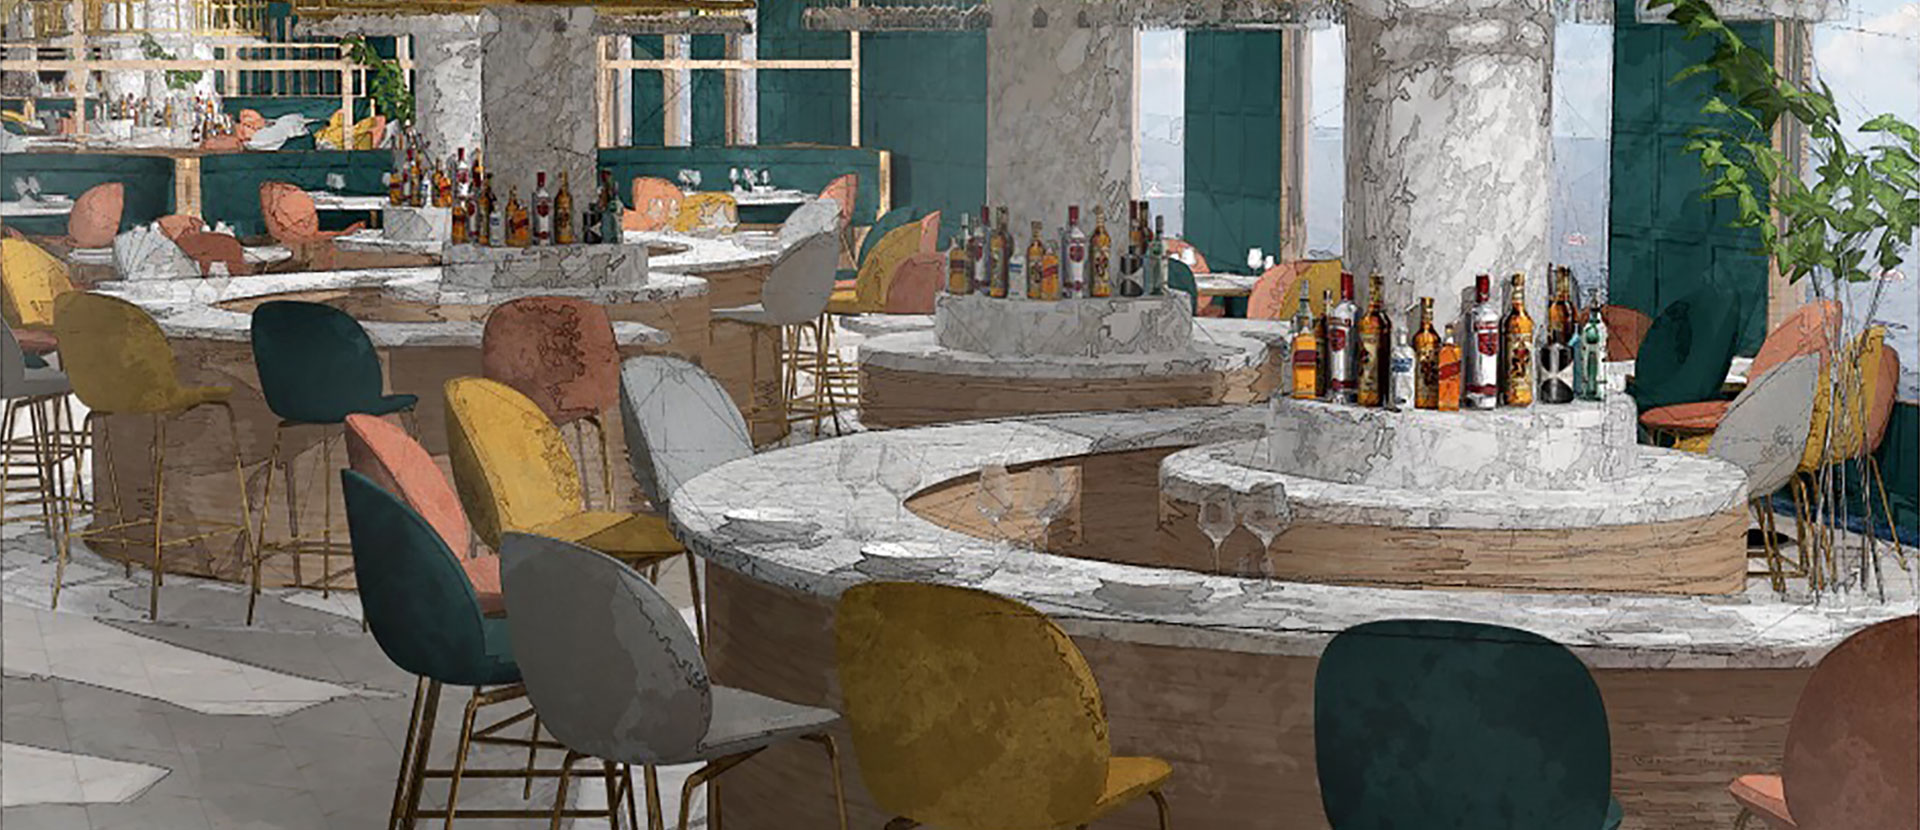 Jason Livingstone project - redesign of the Queen Mary 2 bar